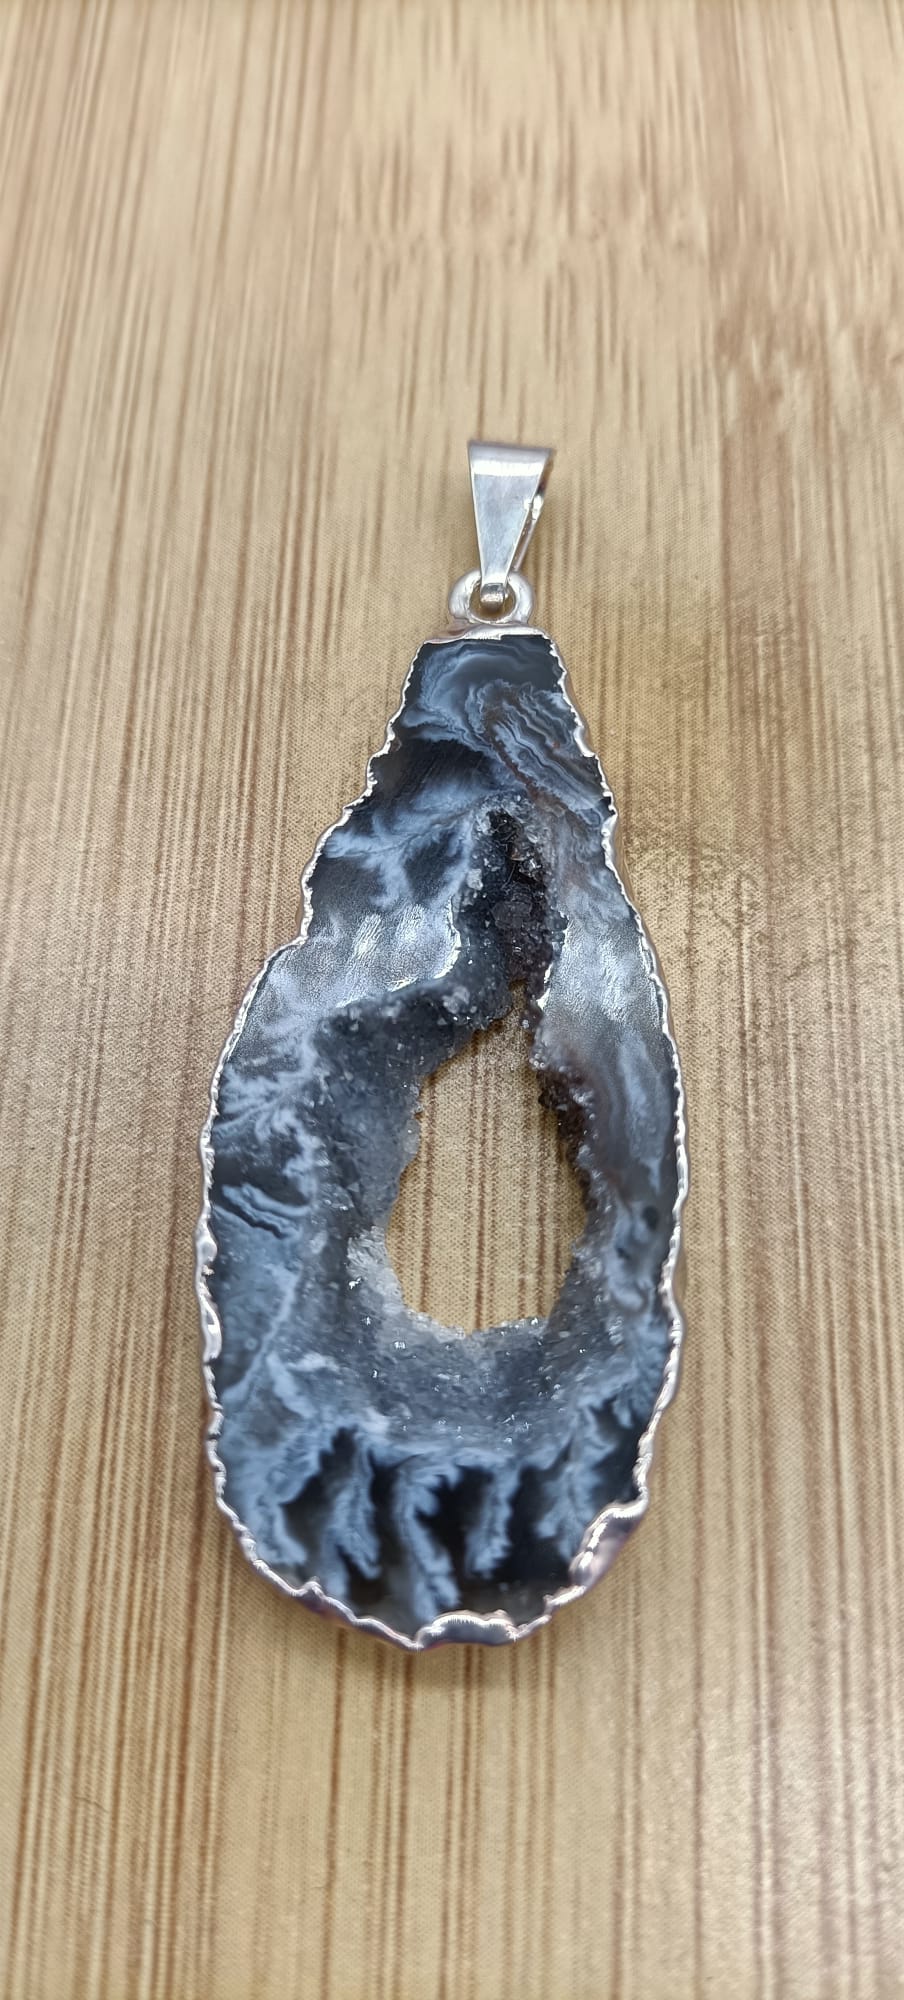 Agate Druze Silver Plated Pendant